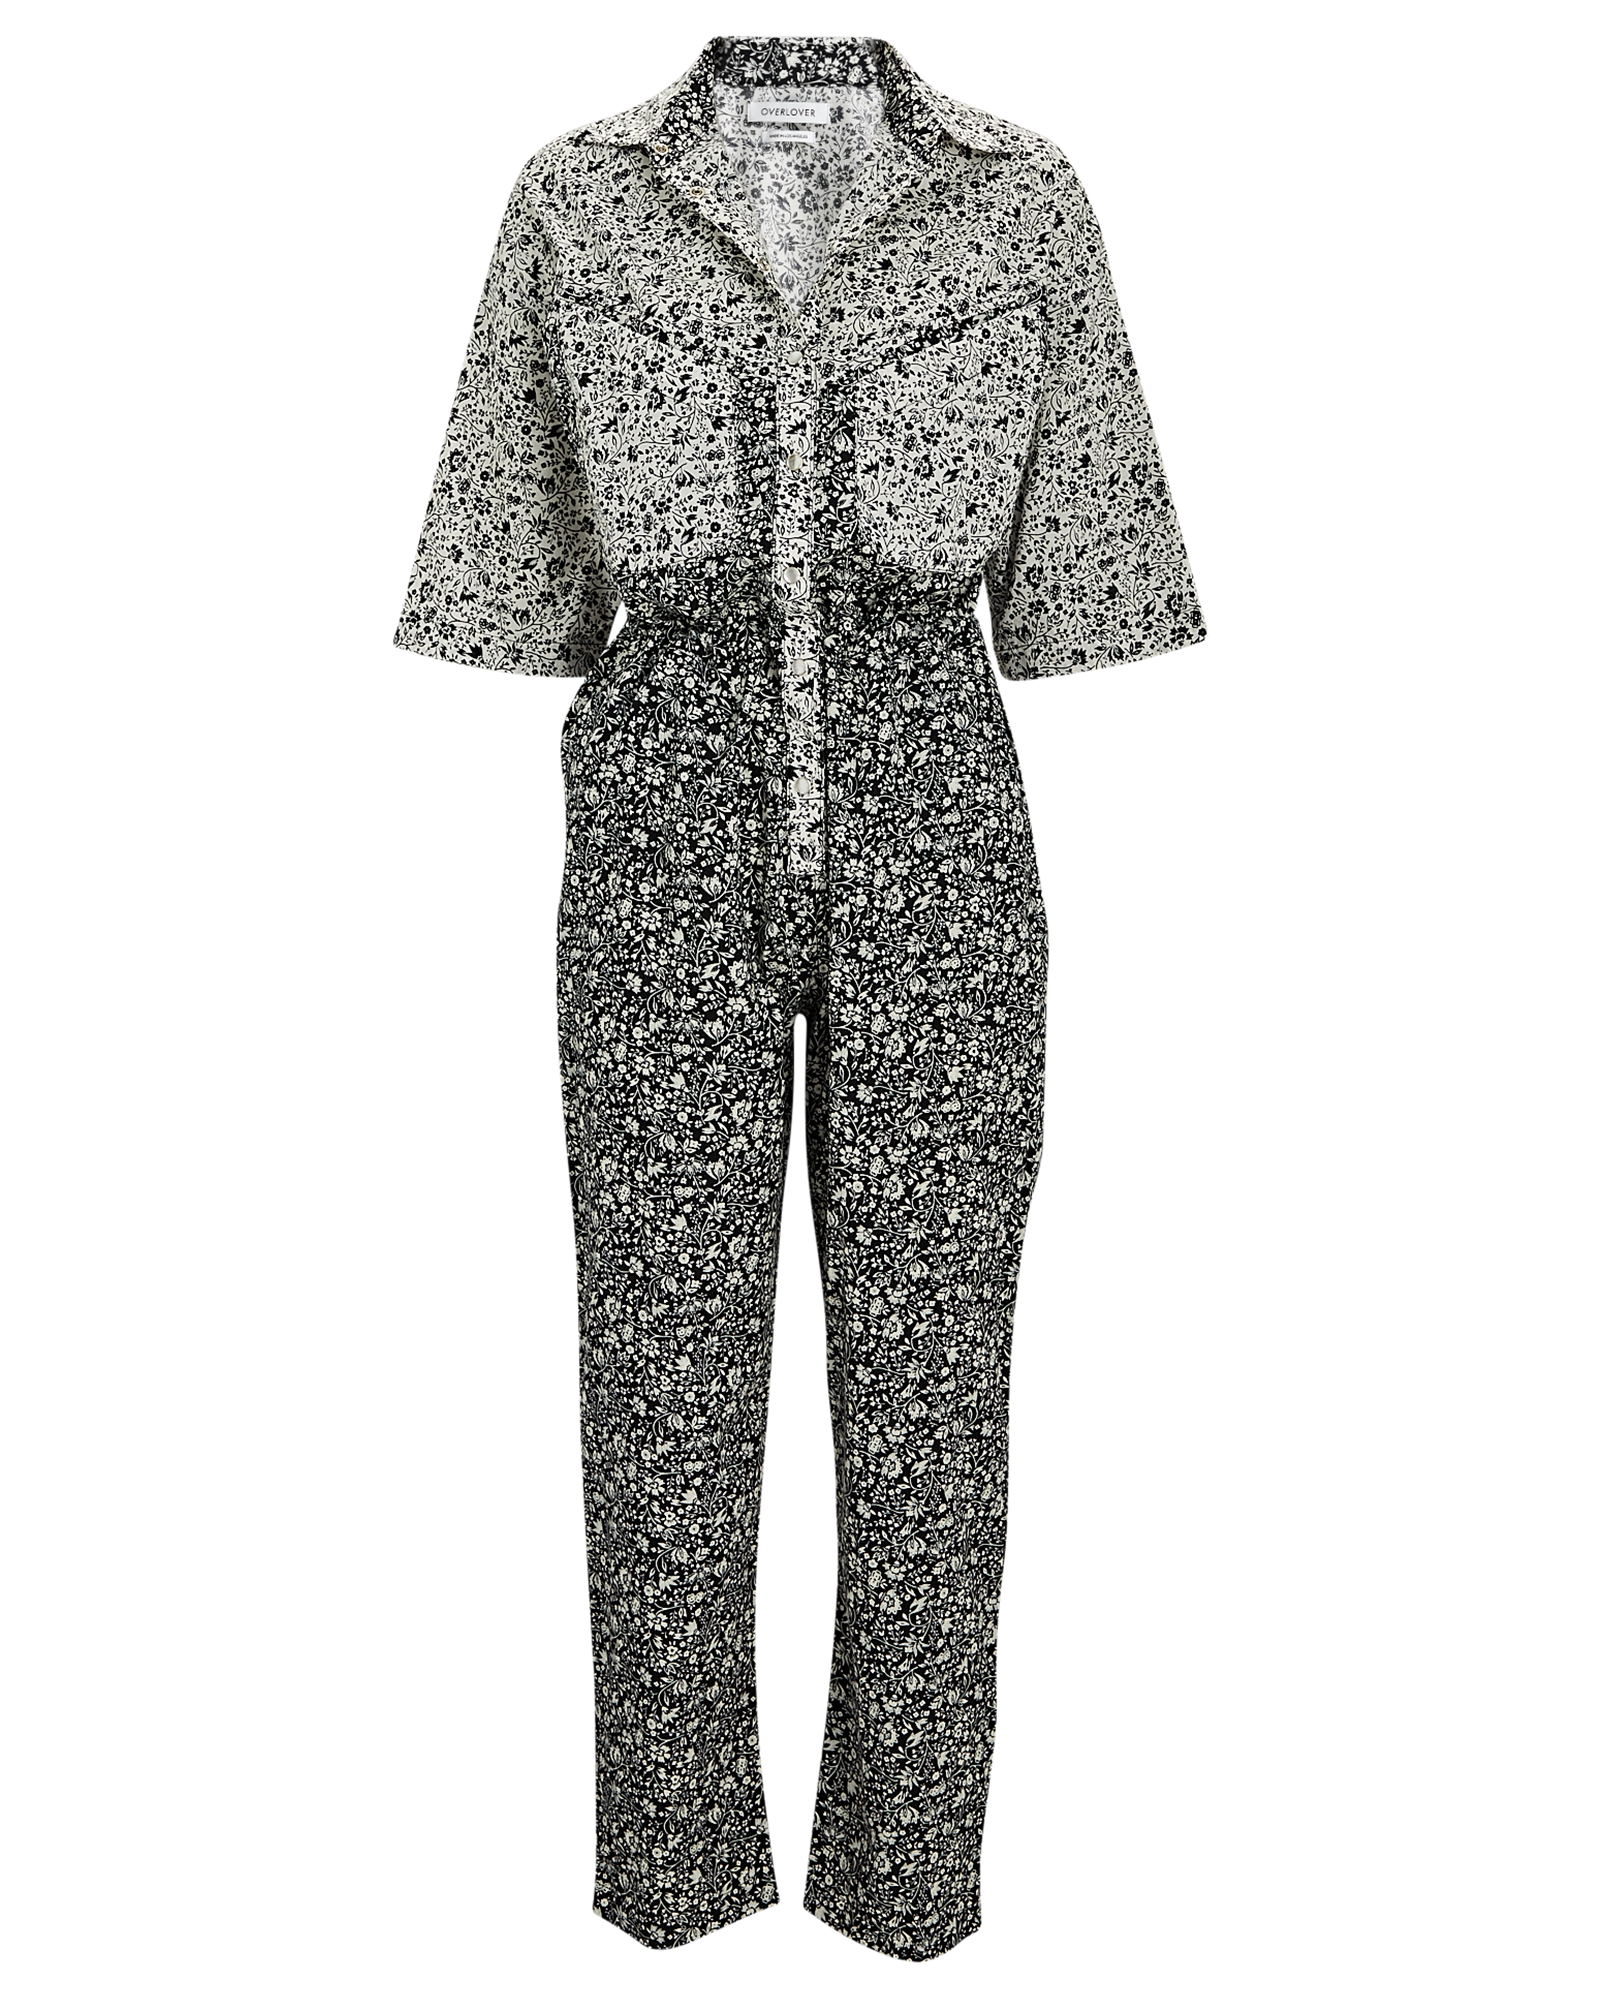 OVERLOVER Lolina Cropped Floral Cotton Jumpsuit | INTERMIX®